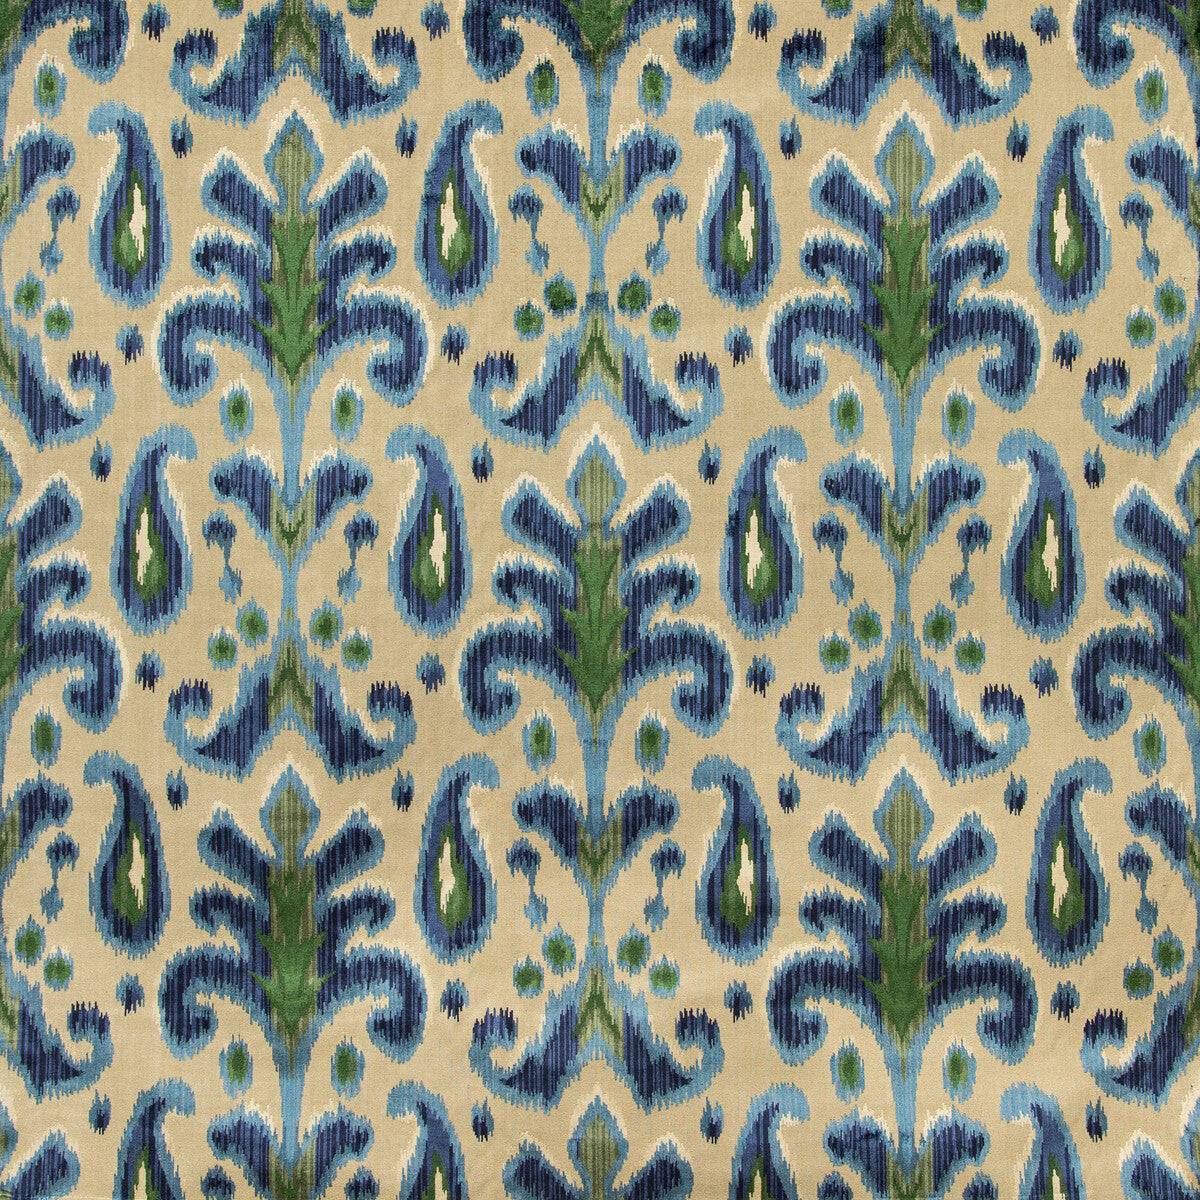 Bronwen Velvet fabric in blue/green color - pattern 2019123.53.0 - by Lee Jofa in the Harlington Velvets collection